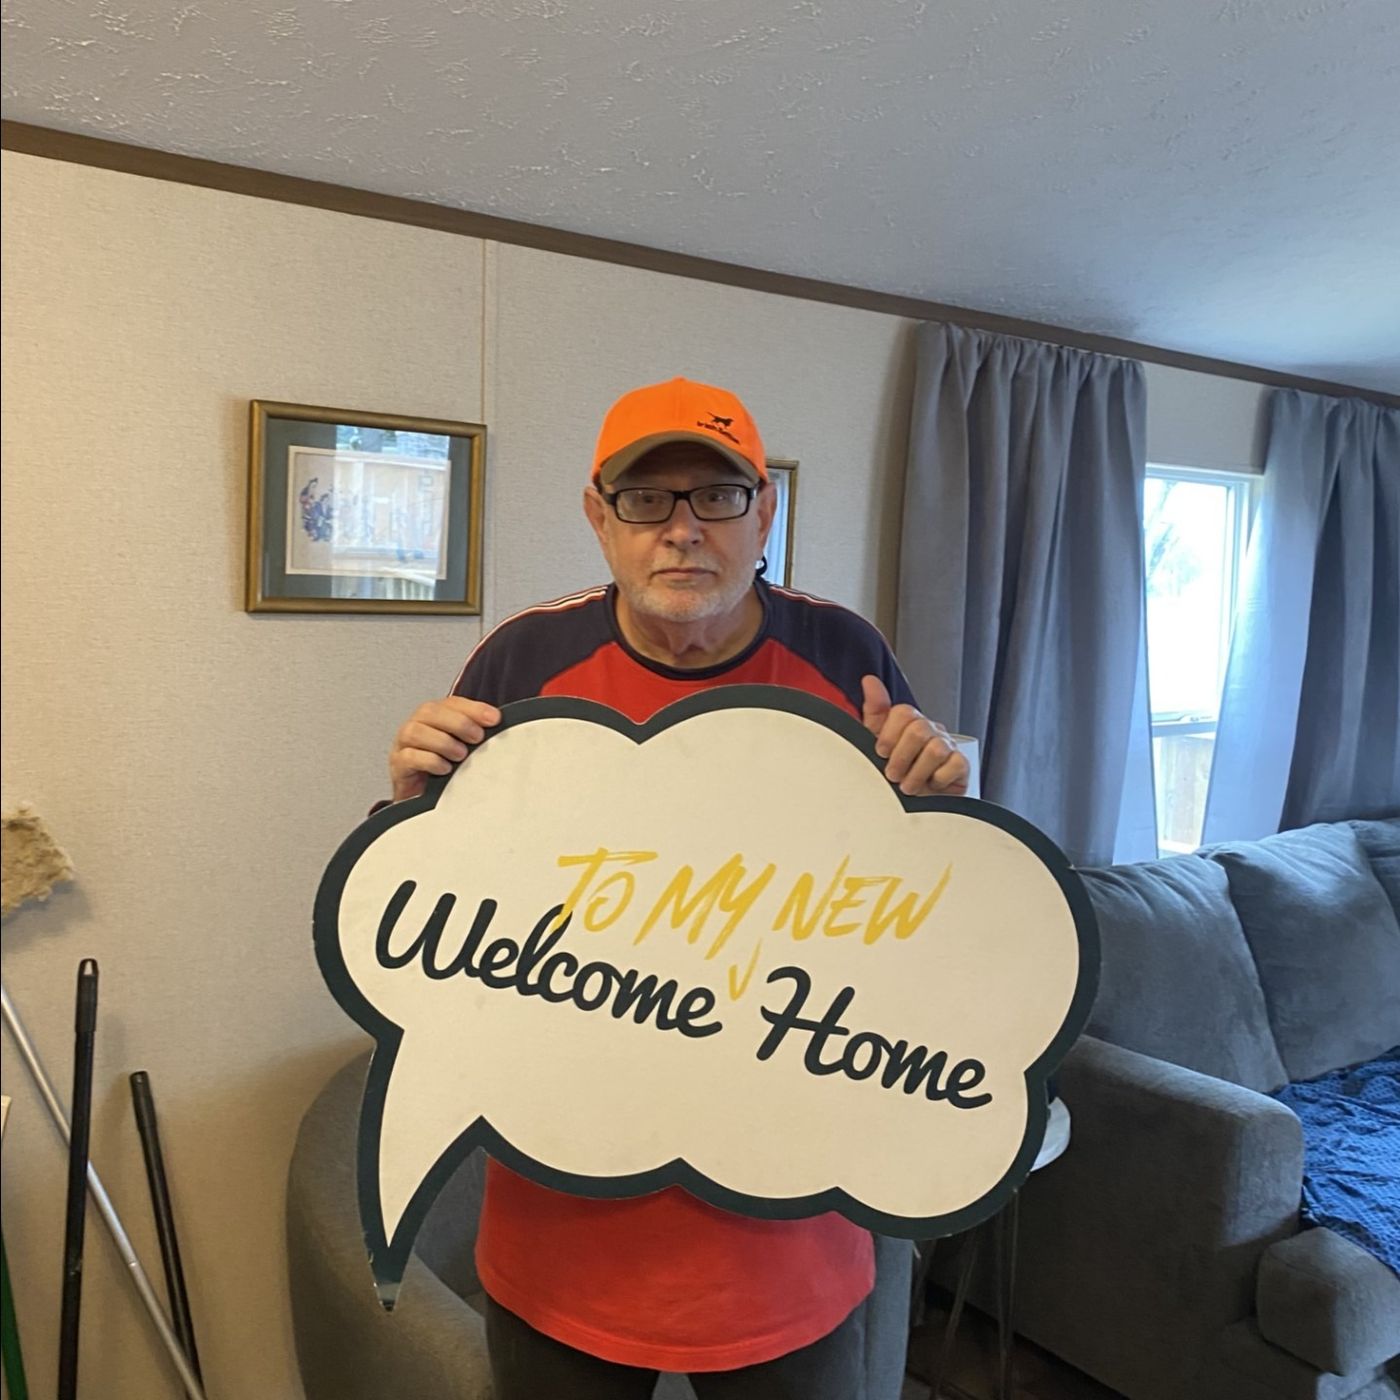 THOMAS A. welcome home image